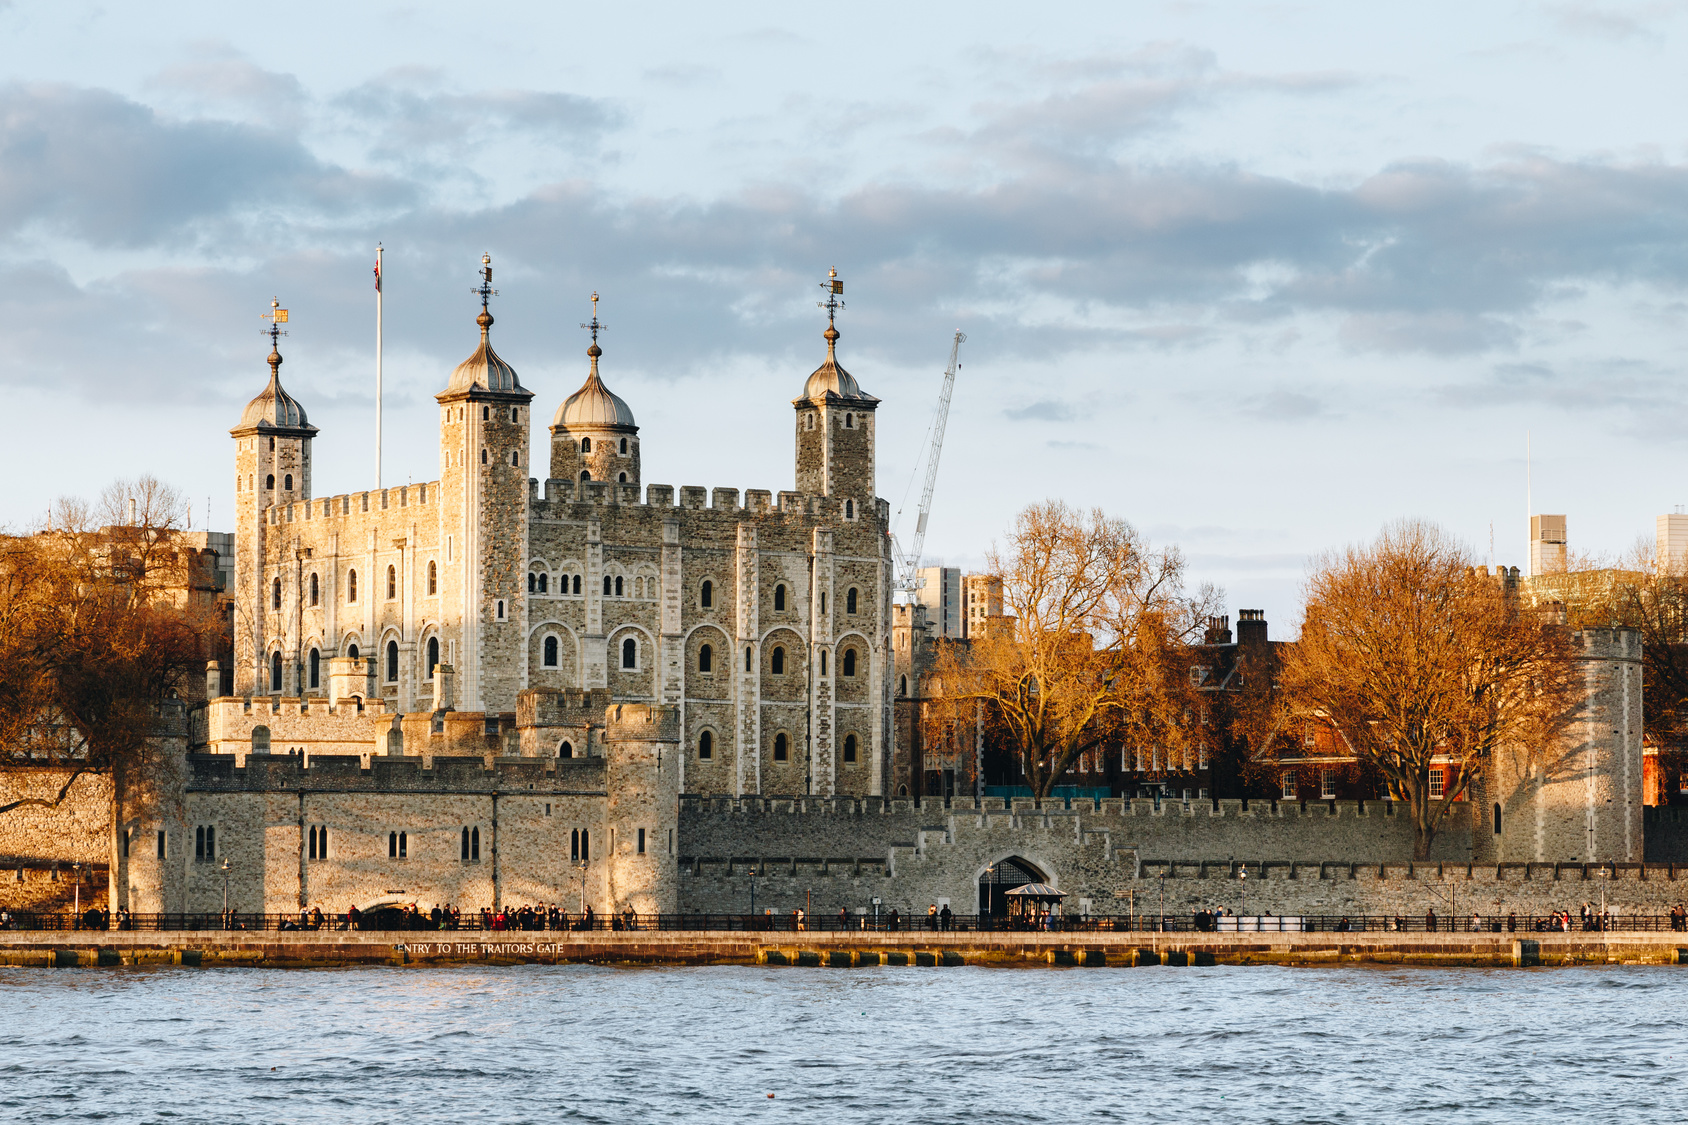 tower of london essay